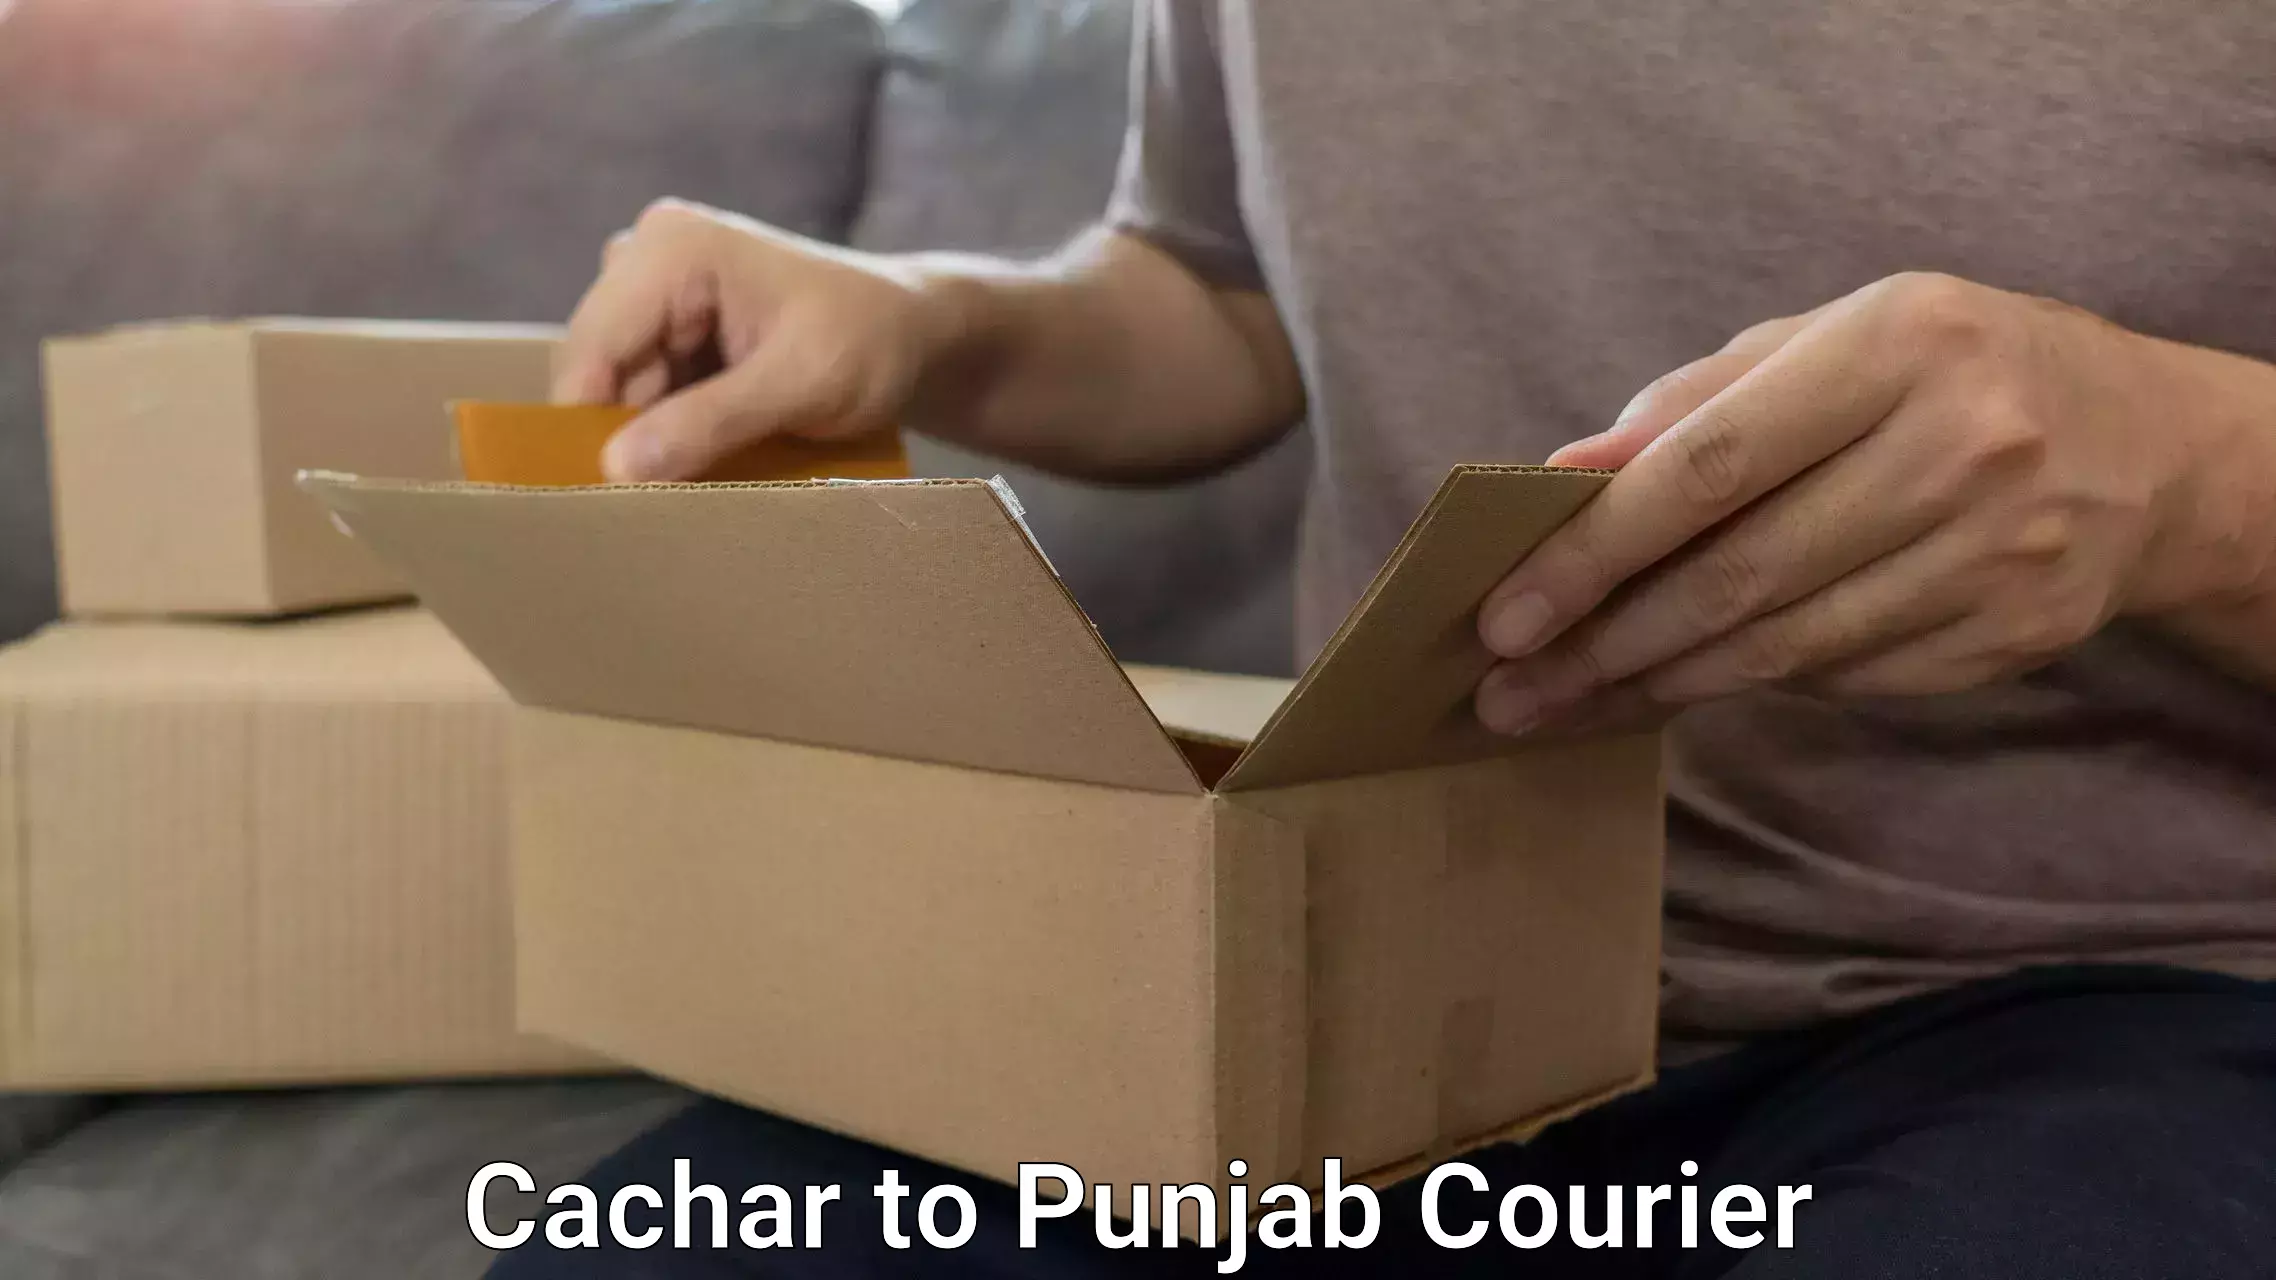 Online luggage shipping booking Cachar to Nawanshahr